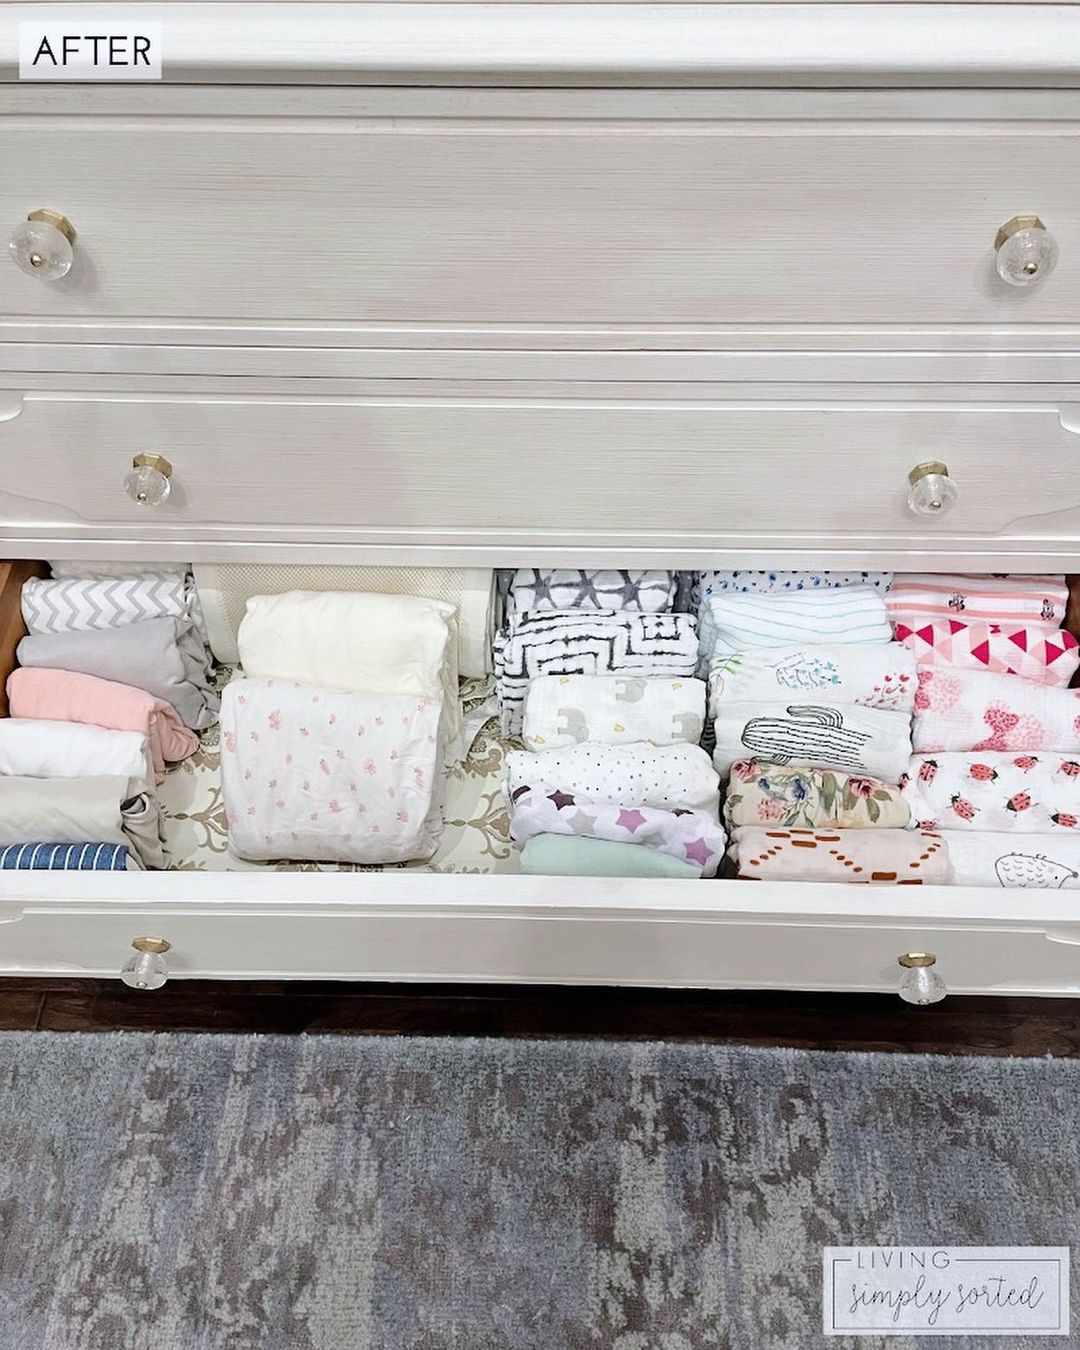 Blankets organized in drawers.